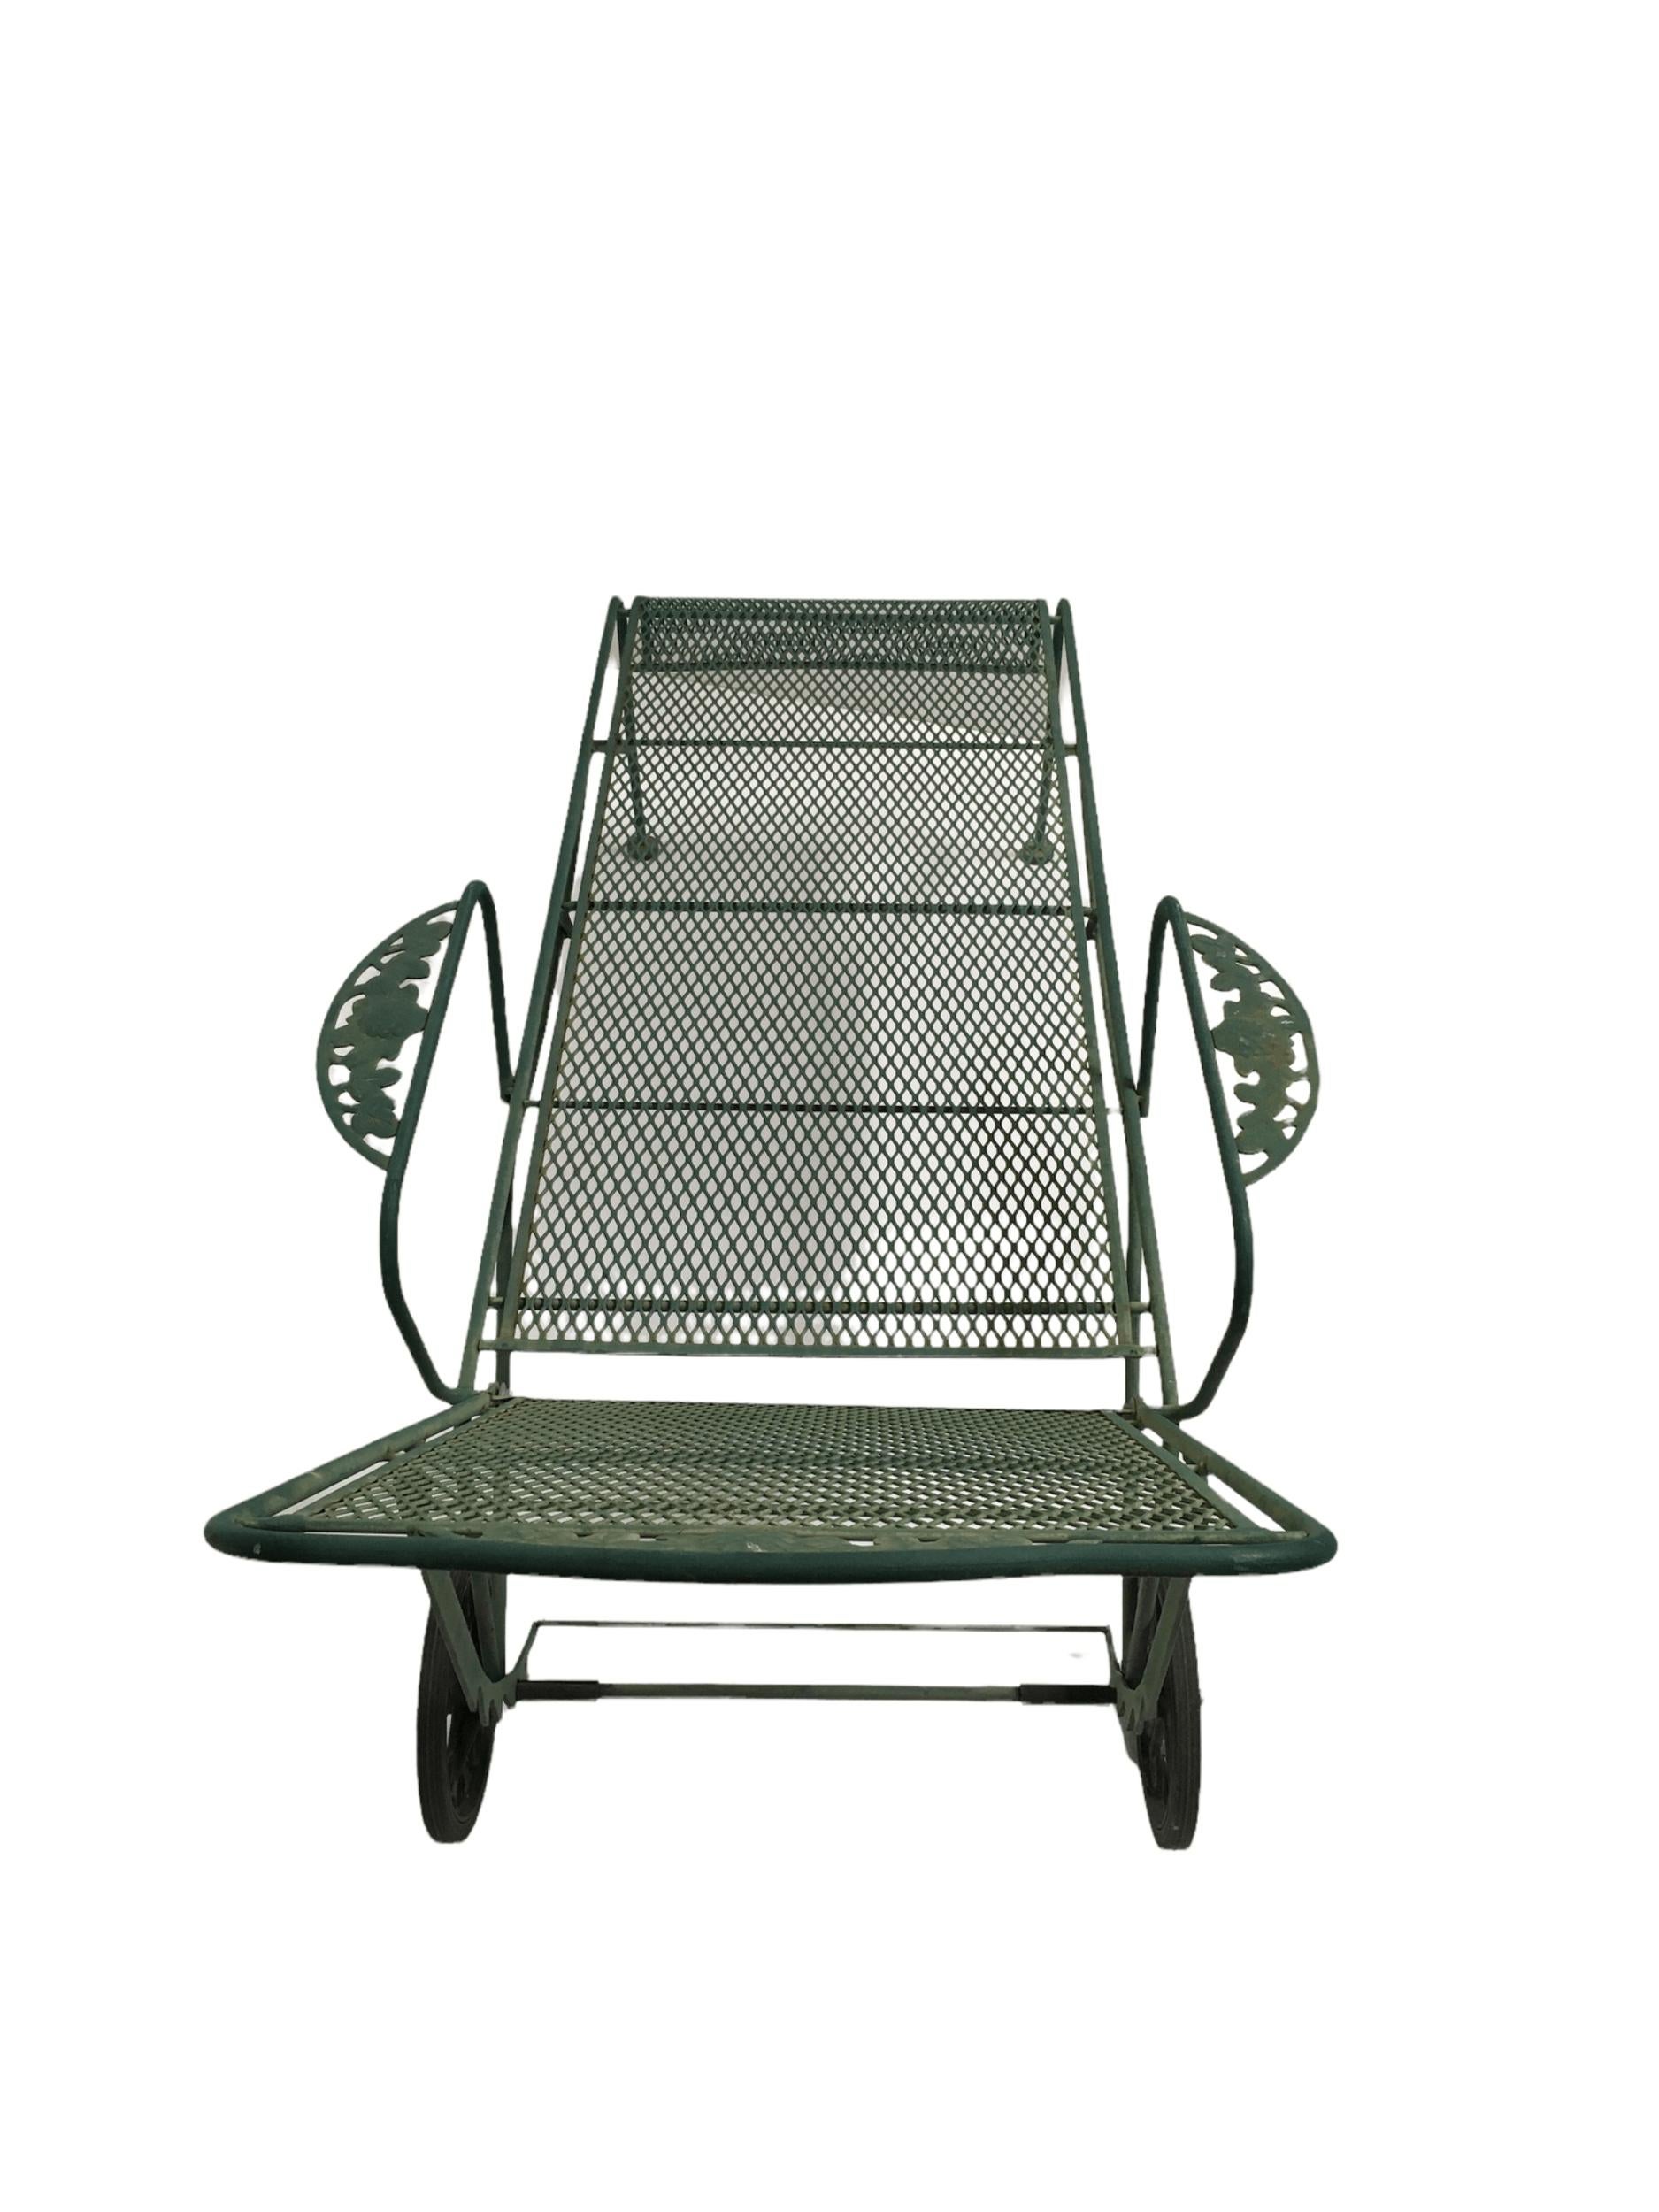 American Wrought Iron Chaise Patio/Outdoor Lounger w/ Adjustable Back by Woodard, Pair